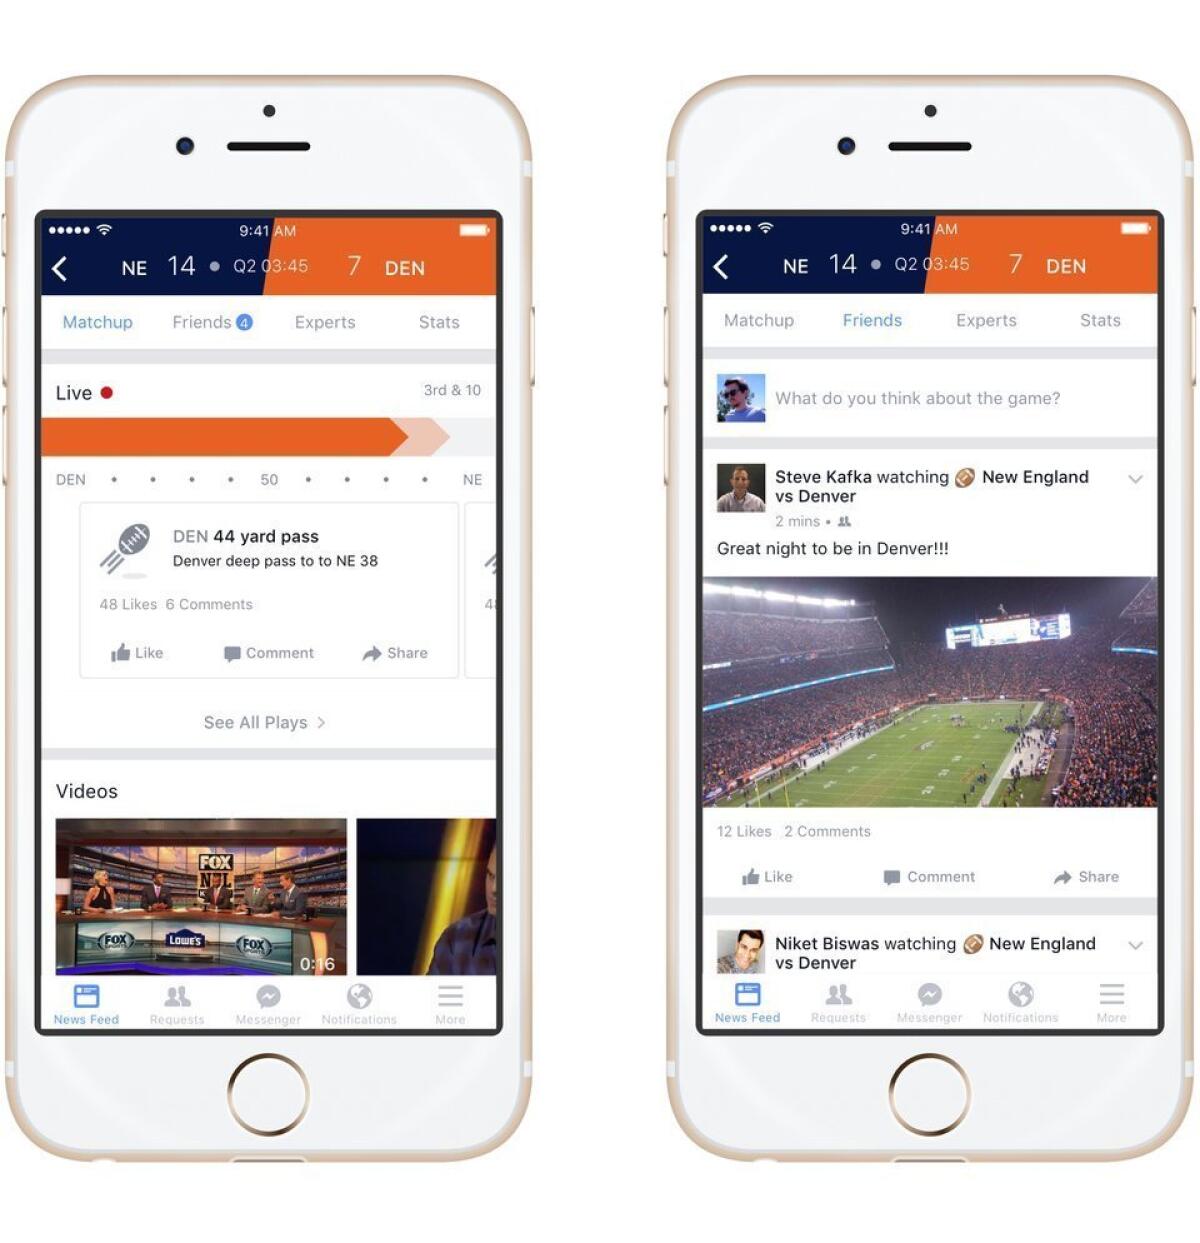 Facebook's new sports product will debut during this weekend's NFL conference championship games.